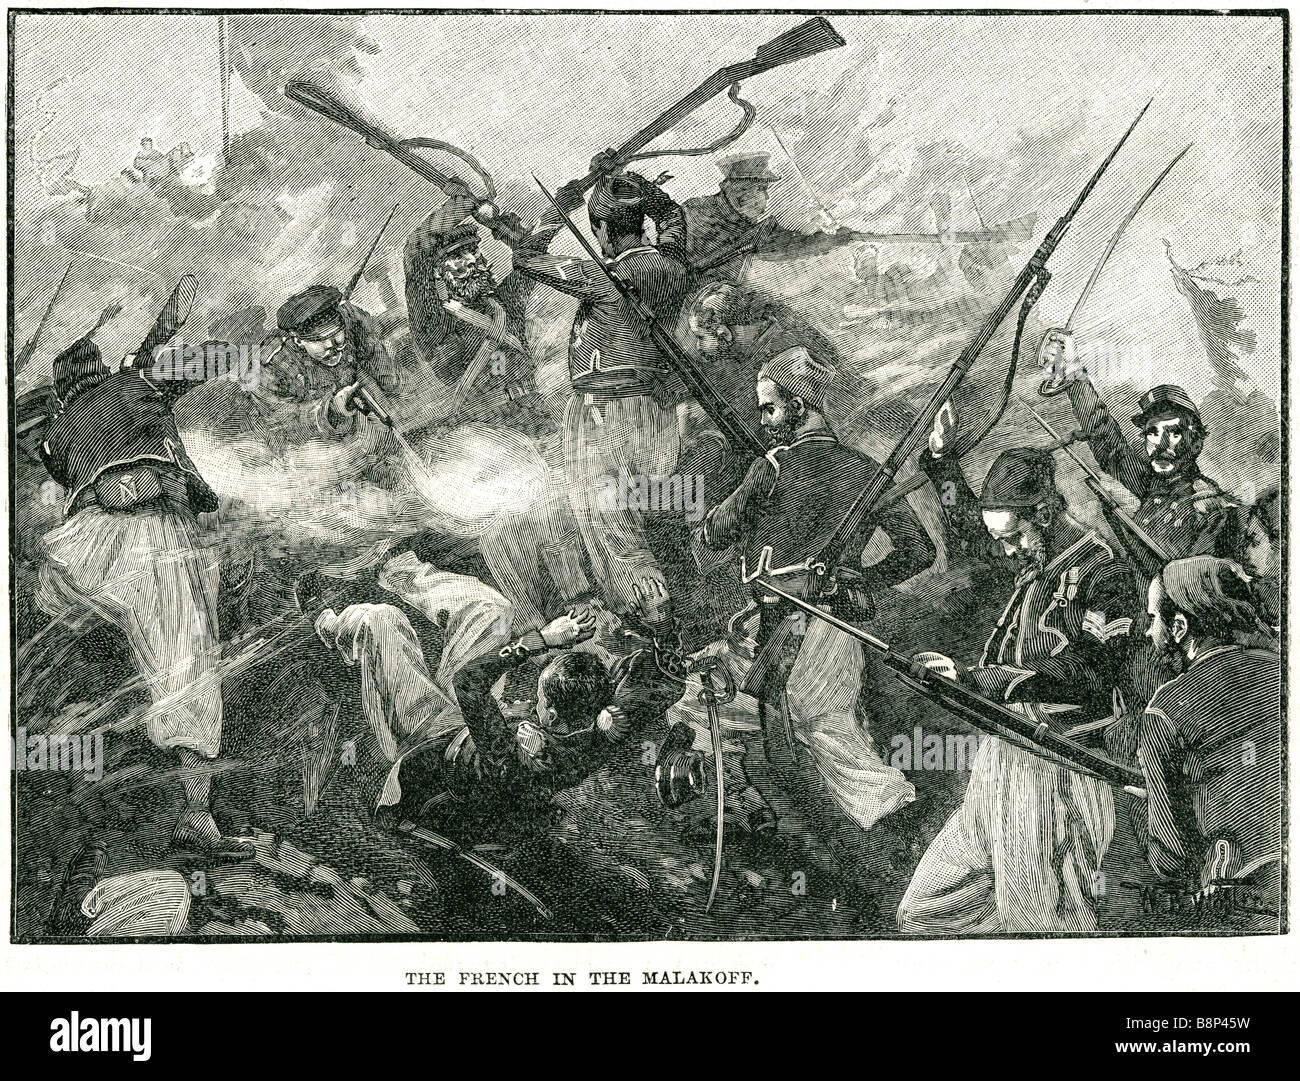 french Battle of Malakoff 1855 Crimean War French Russian Siege of Sevastopol General MacMahon Stock Photo